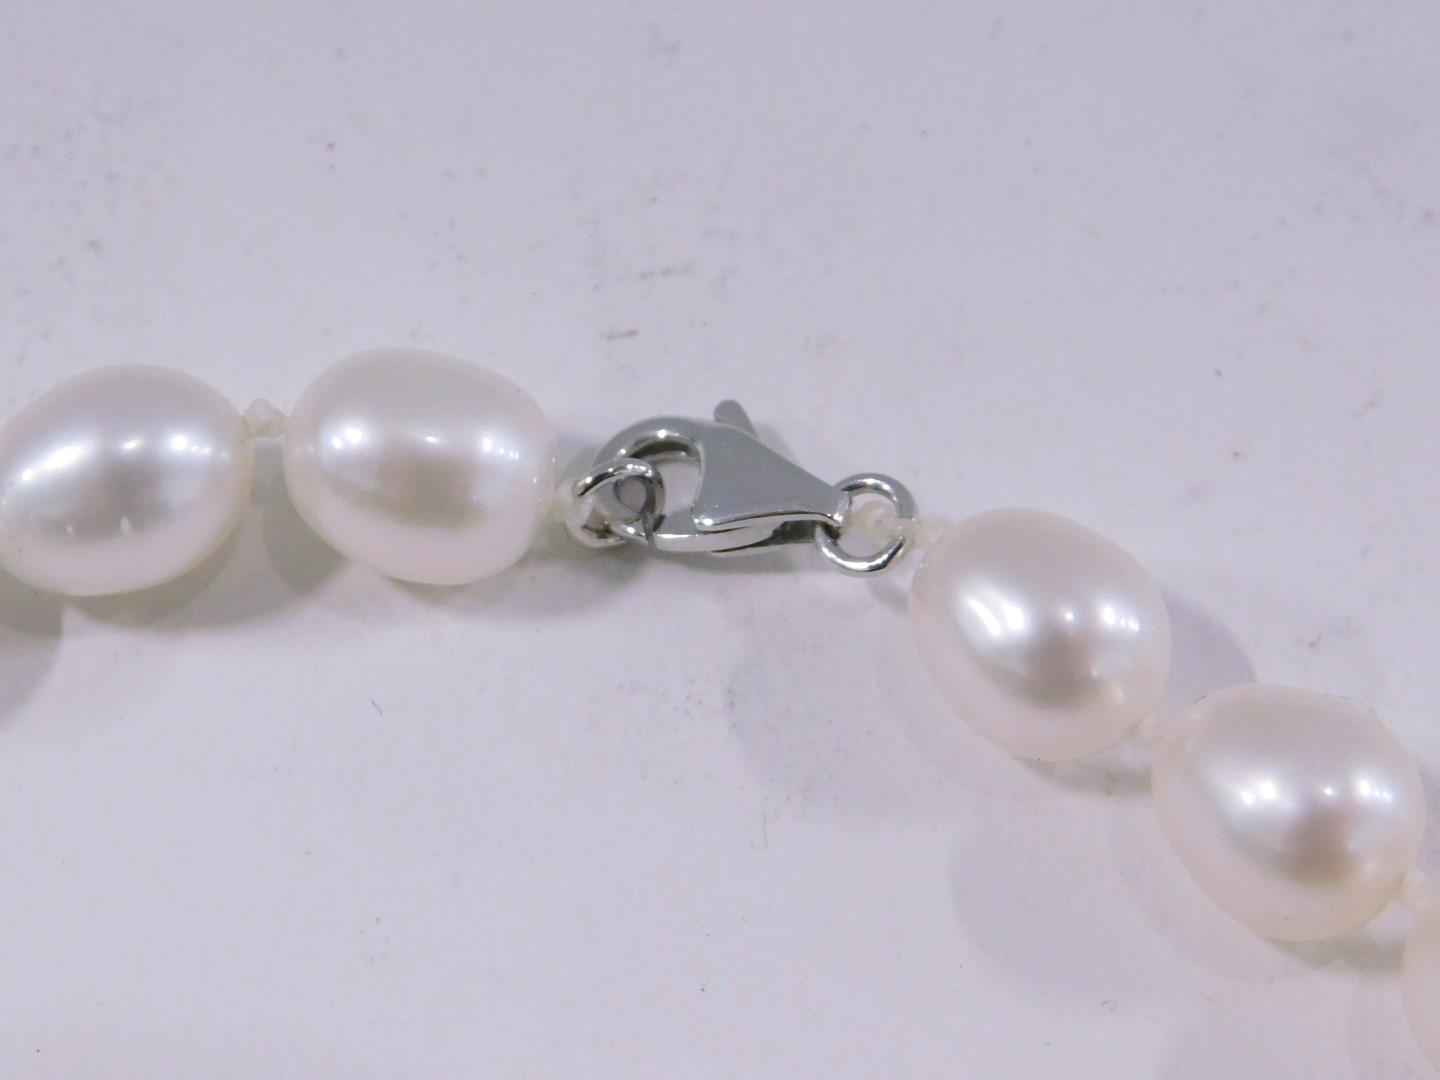 A pearl necklace, with white lustre finish beads, on a knotted string strand, of varying sizes, the - Image 2 of 2